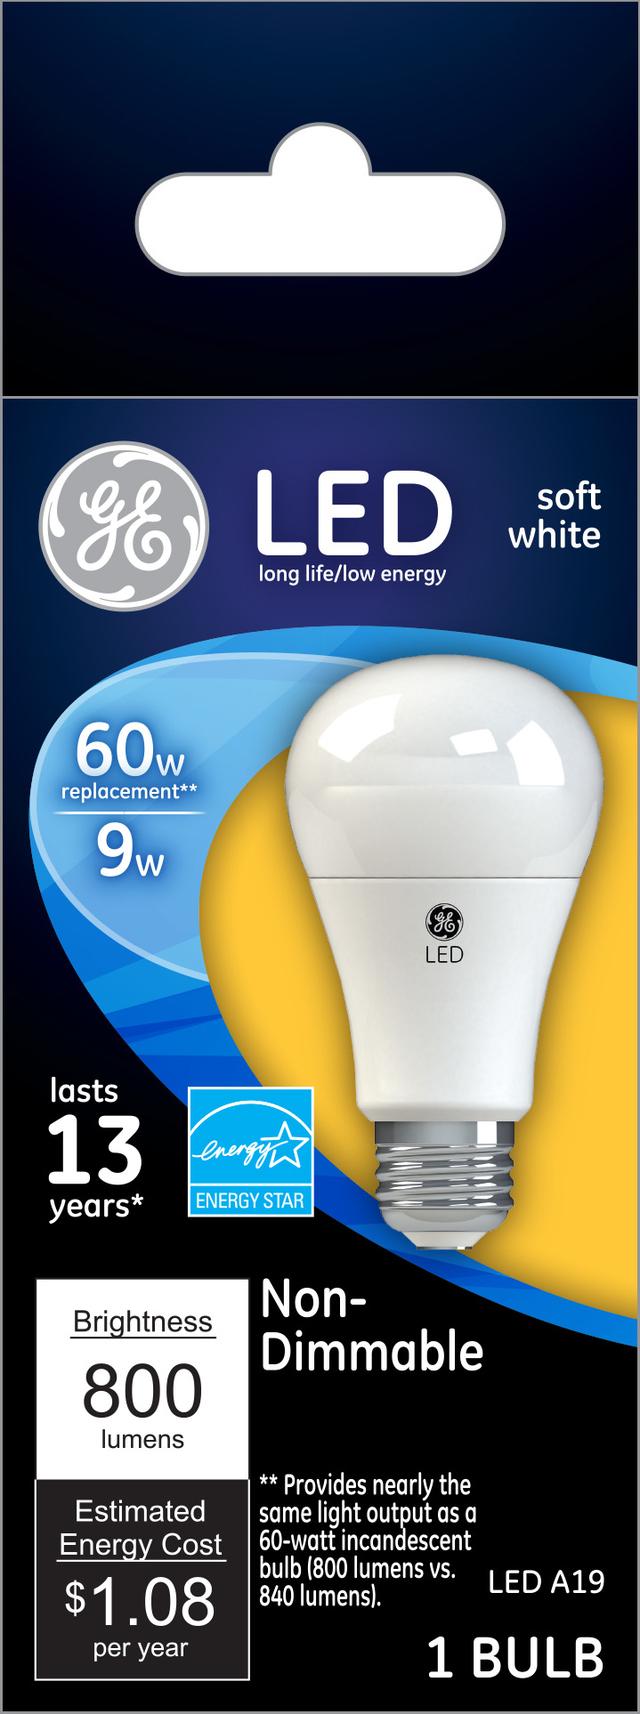 GE Classic/LED Core LED 60 Watt Replacement, Soft White, A19 General Purpose Bulbs (1 Pack)